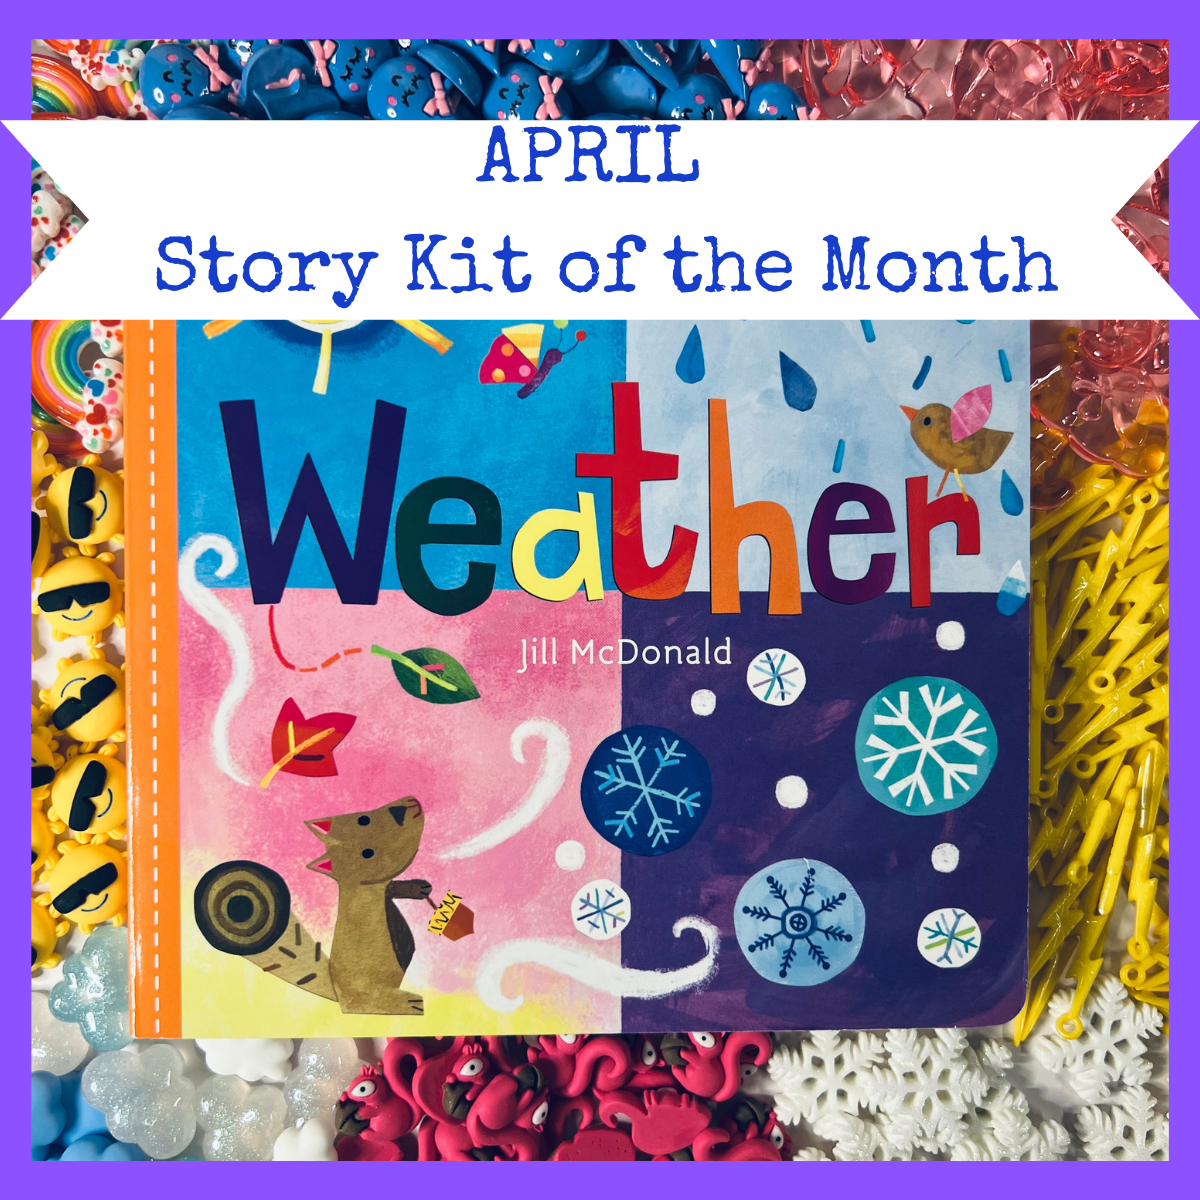 April Story Crate of Month APRIL Book and Story Objects WEATHER story kit Sensory Play Speech Activities & More Speech and Smile-Speech Therapy